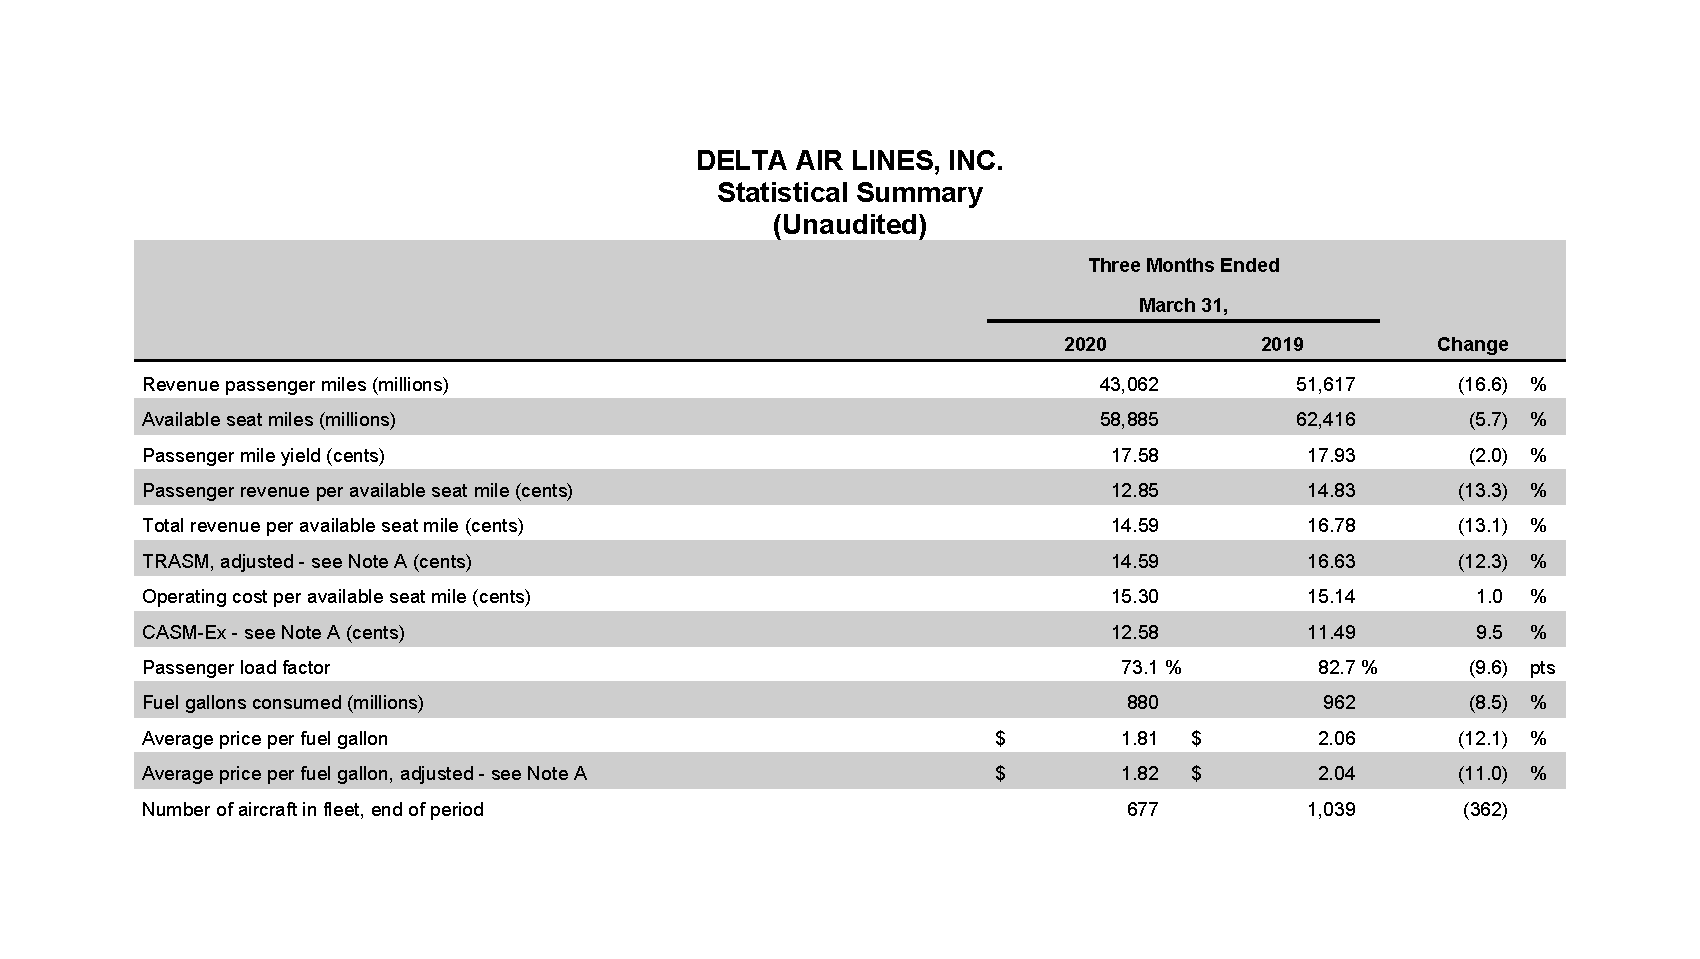 Delta Air Lines Q1 2020 Earnings chart 5.2